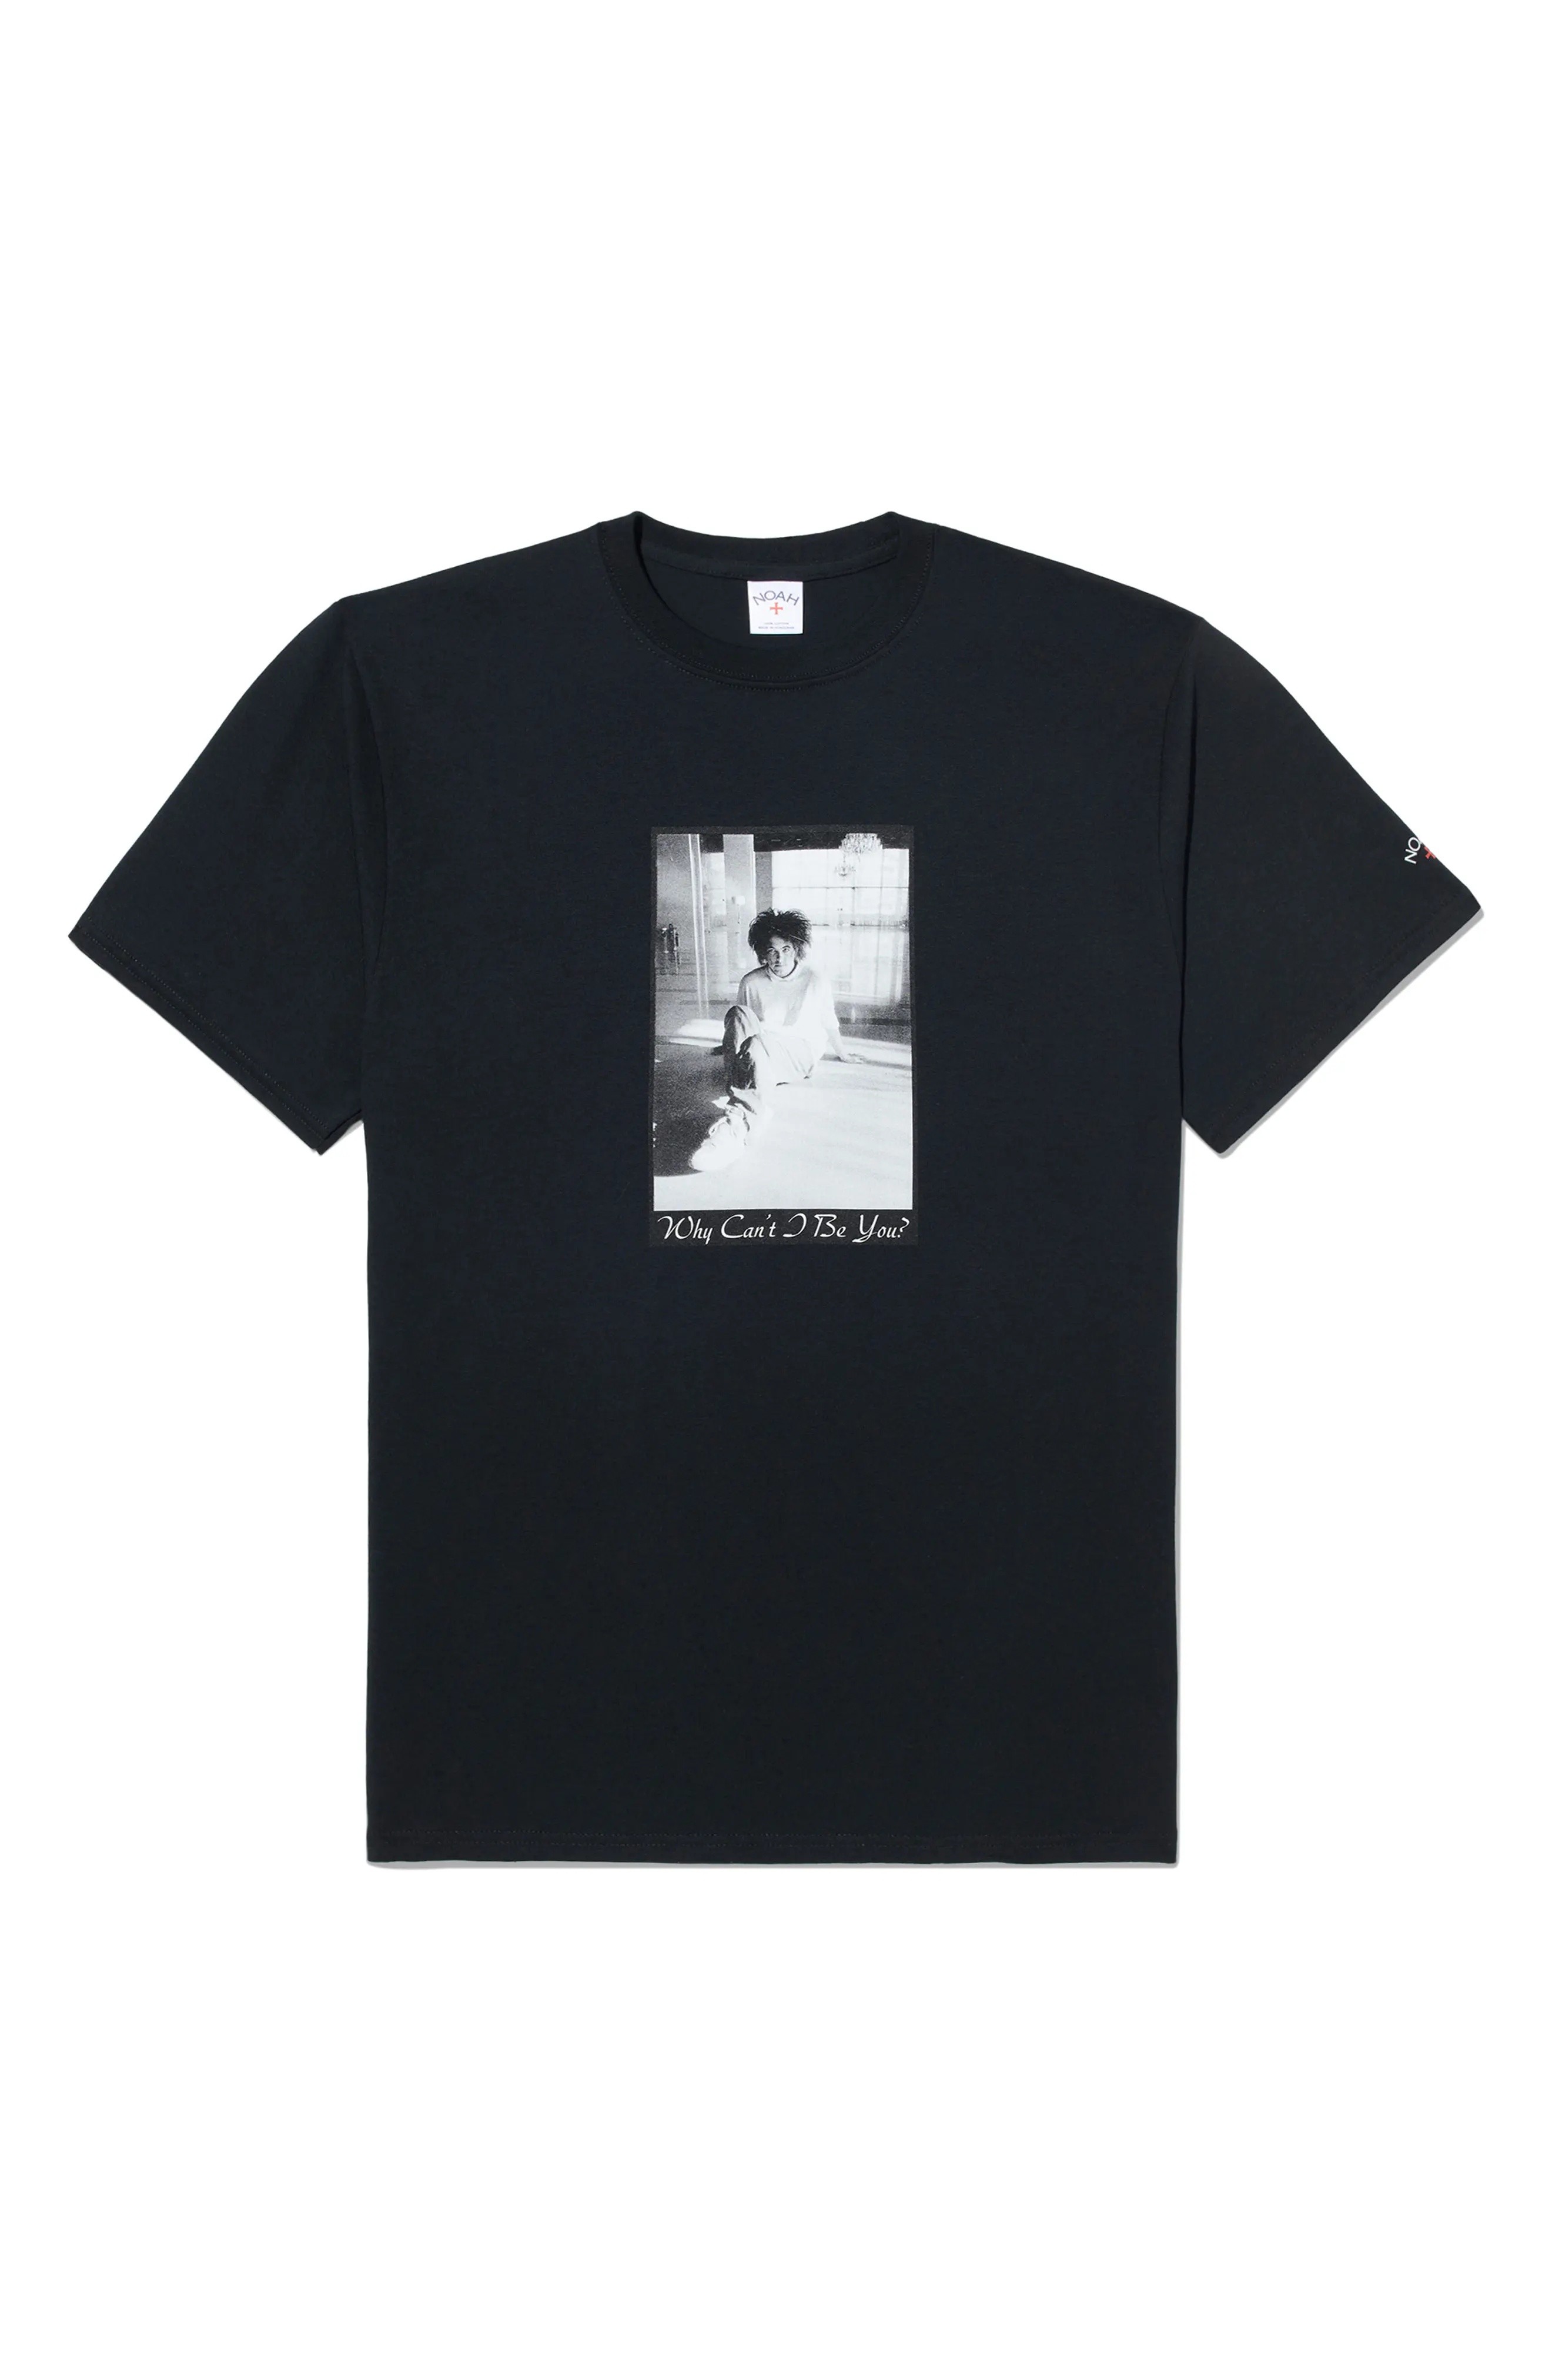 x The Cure 'Why Can't I Be You' Cotton Graphic T-Shirt - 1